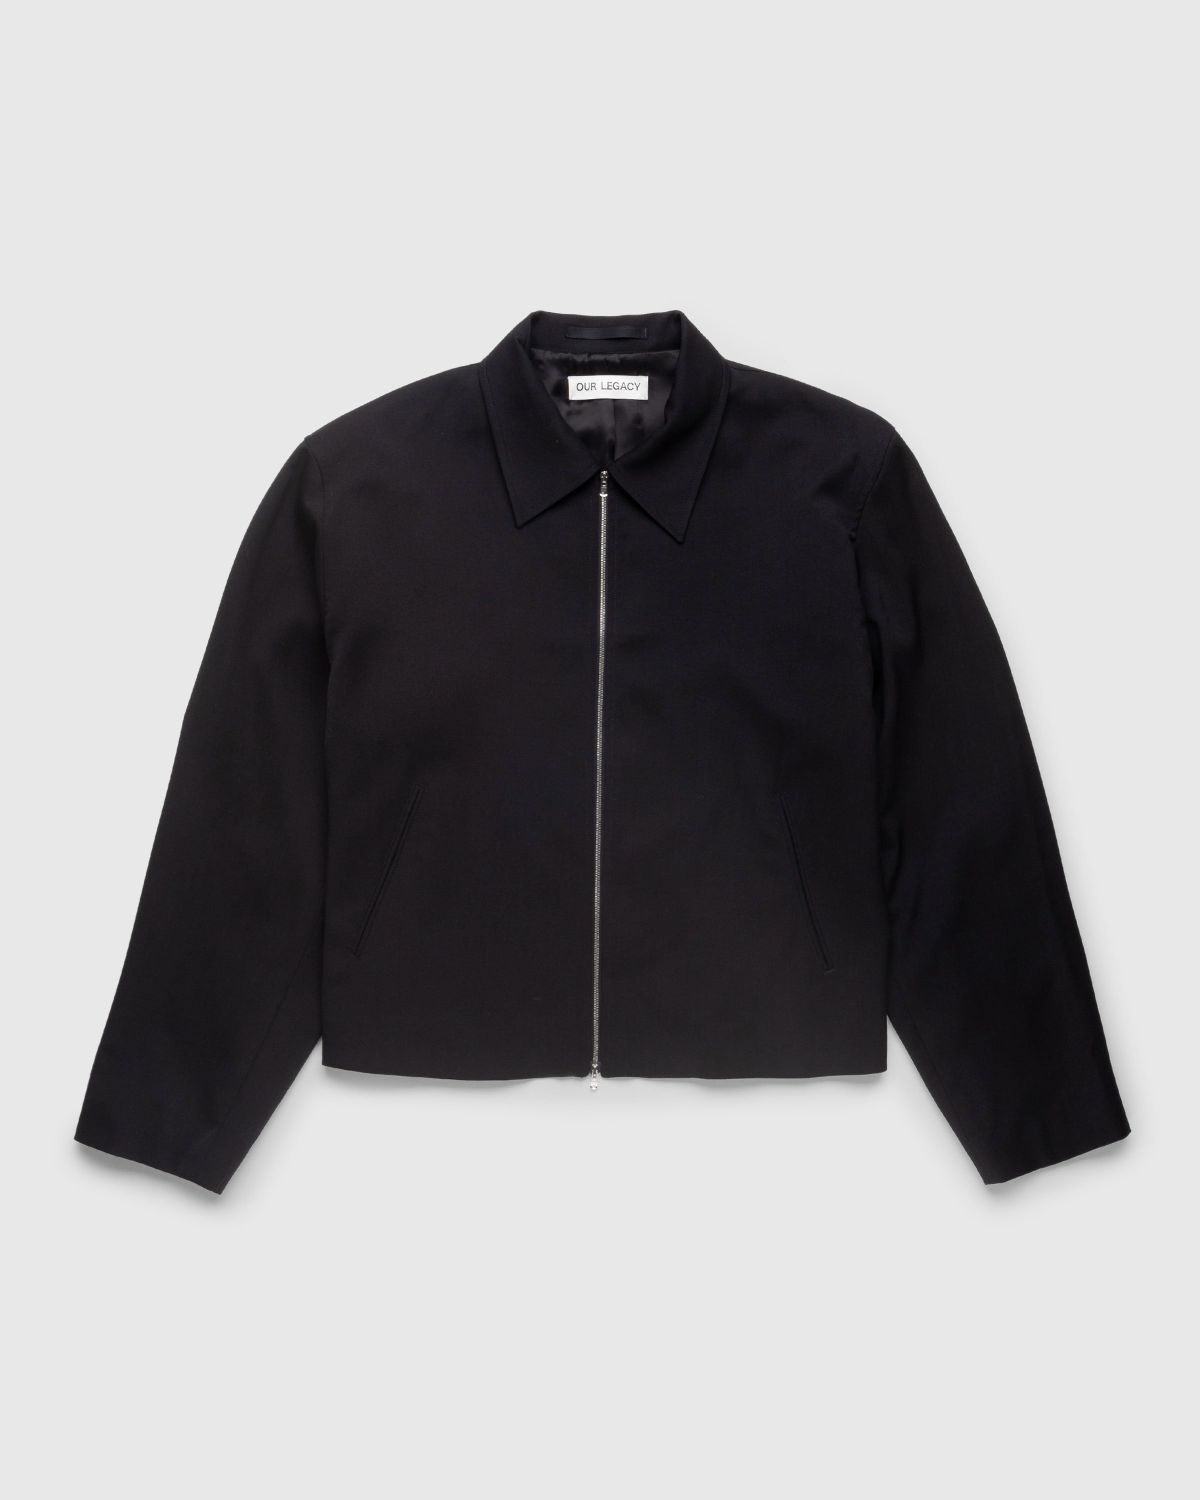 Our Legacy – Mini Jacket Black Worsted Wool | Highsnobiety Shop